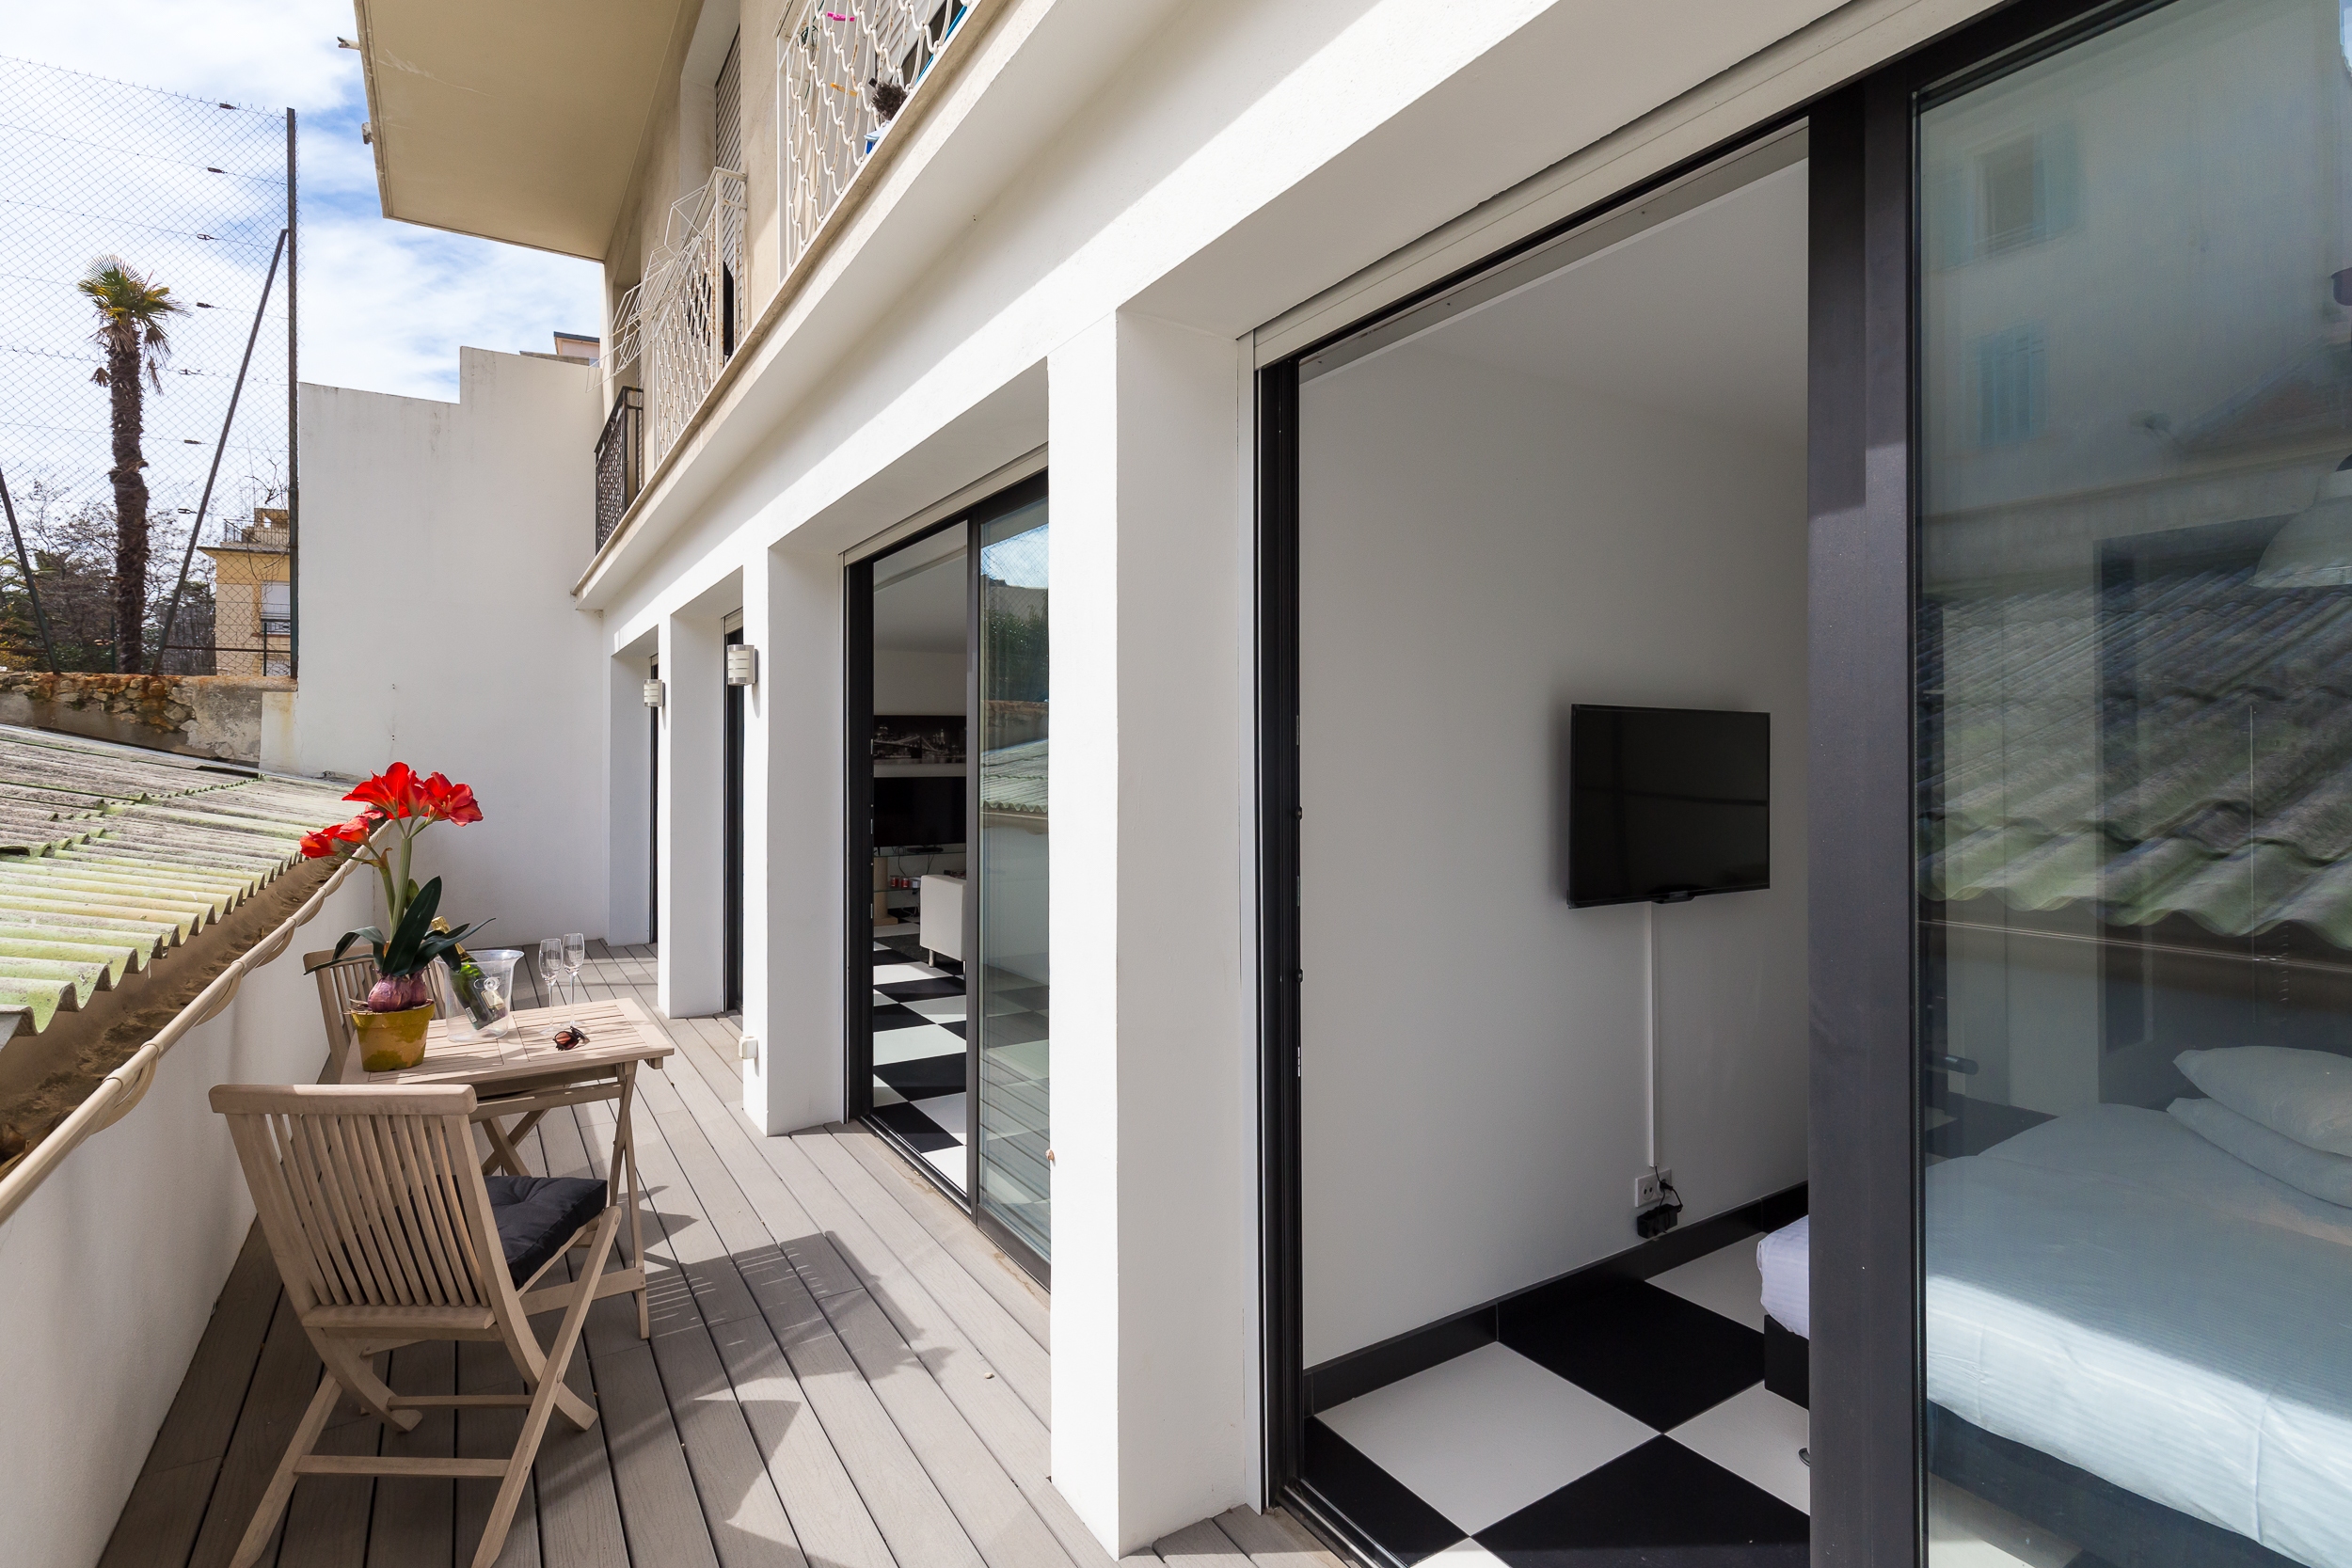 Modern 3 Bed apartment  in Cannes very close to the center and an easy pleasant walk to the Palais - 1745 3